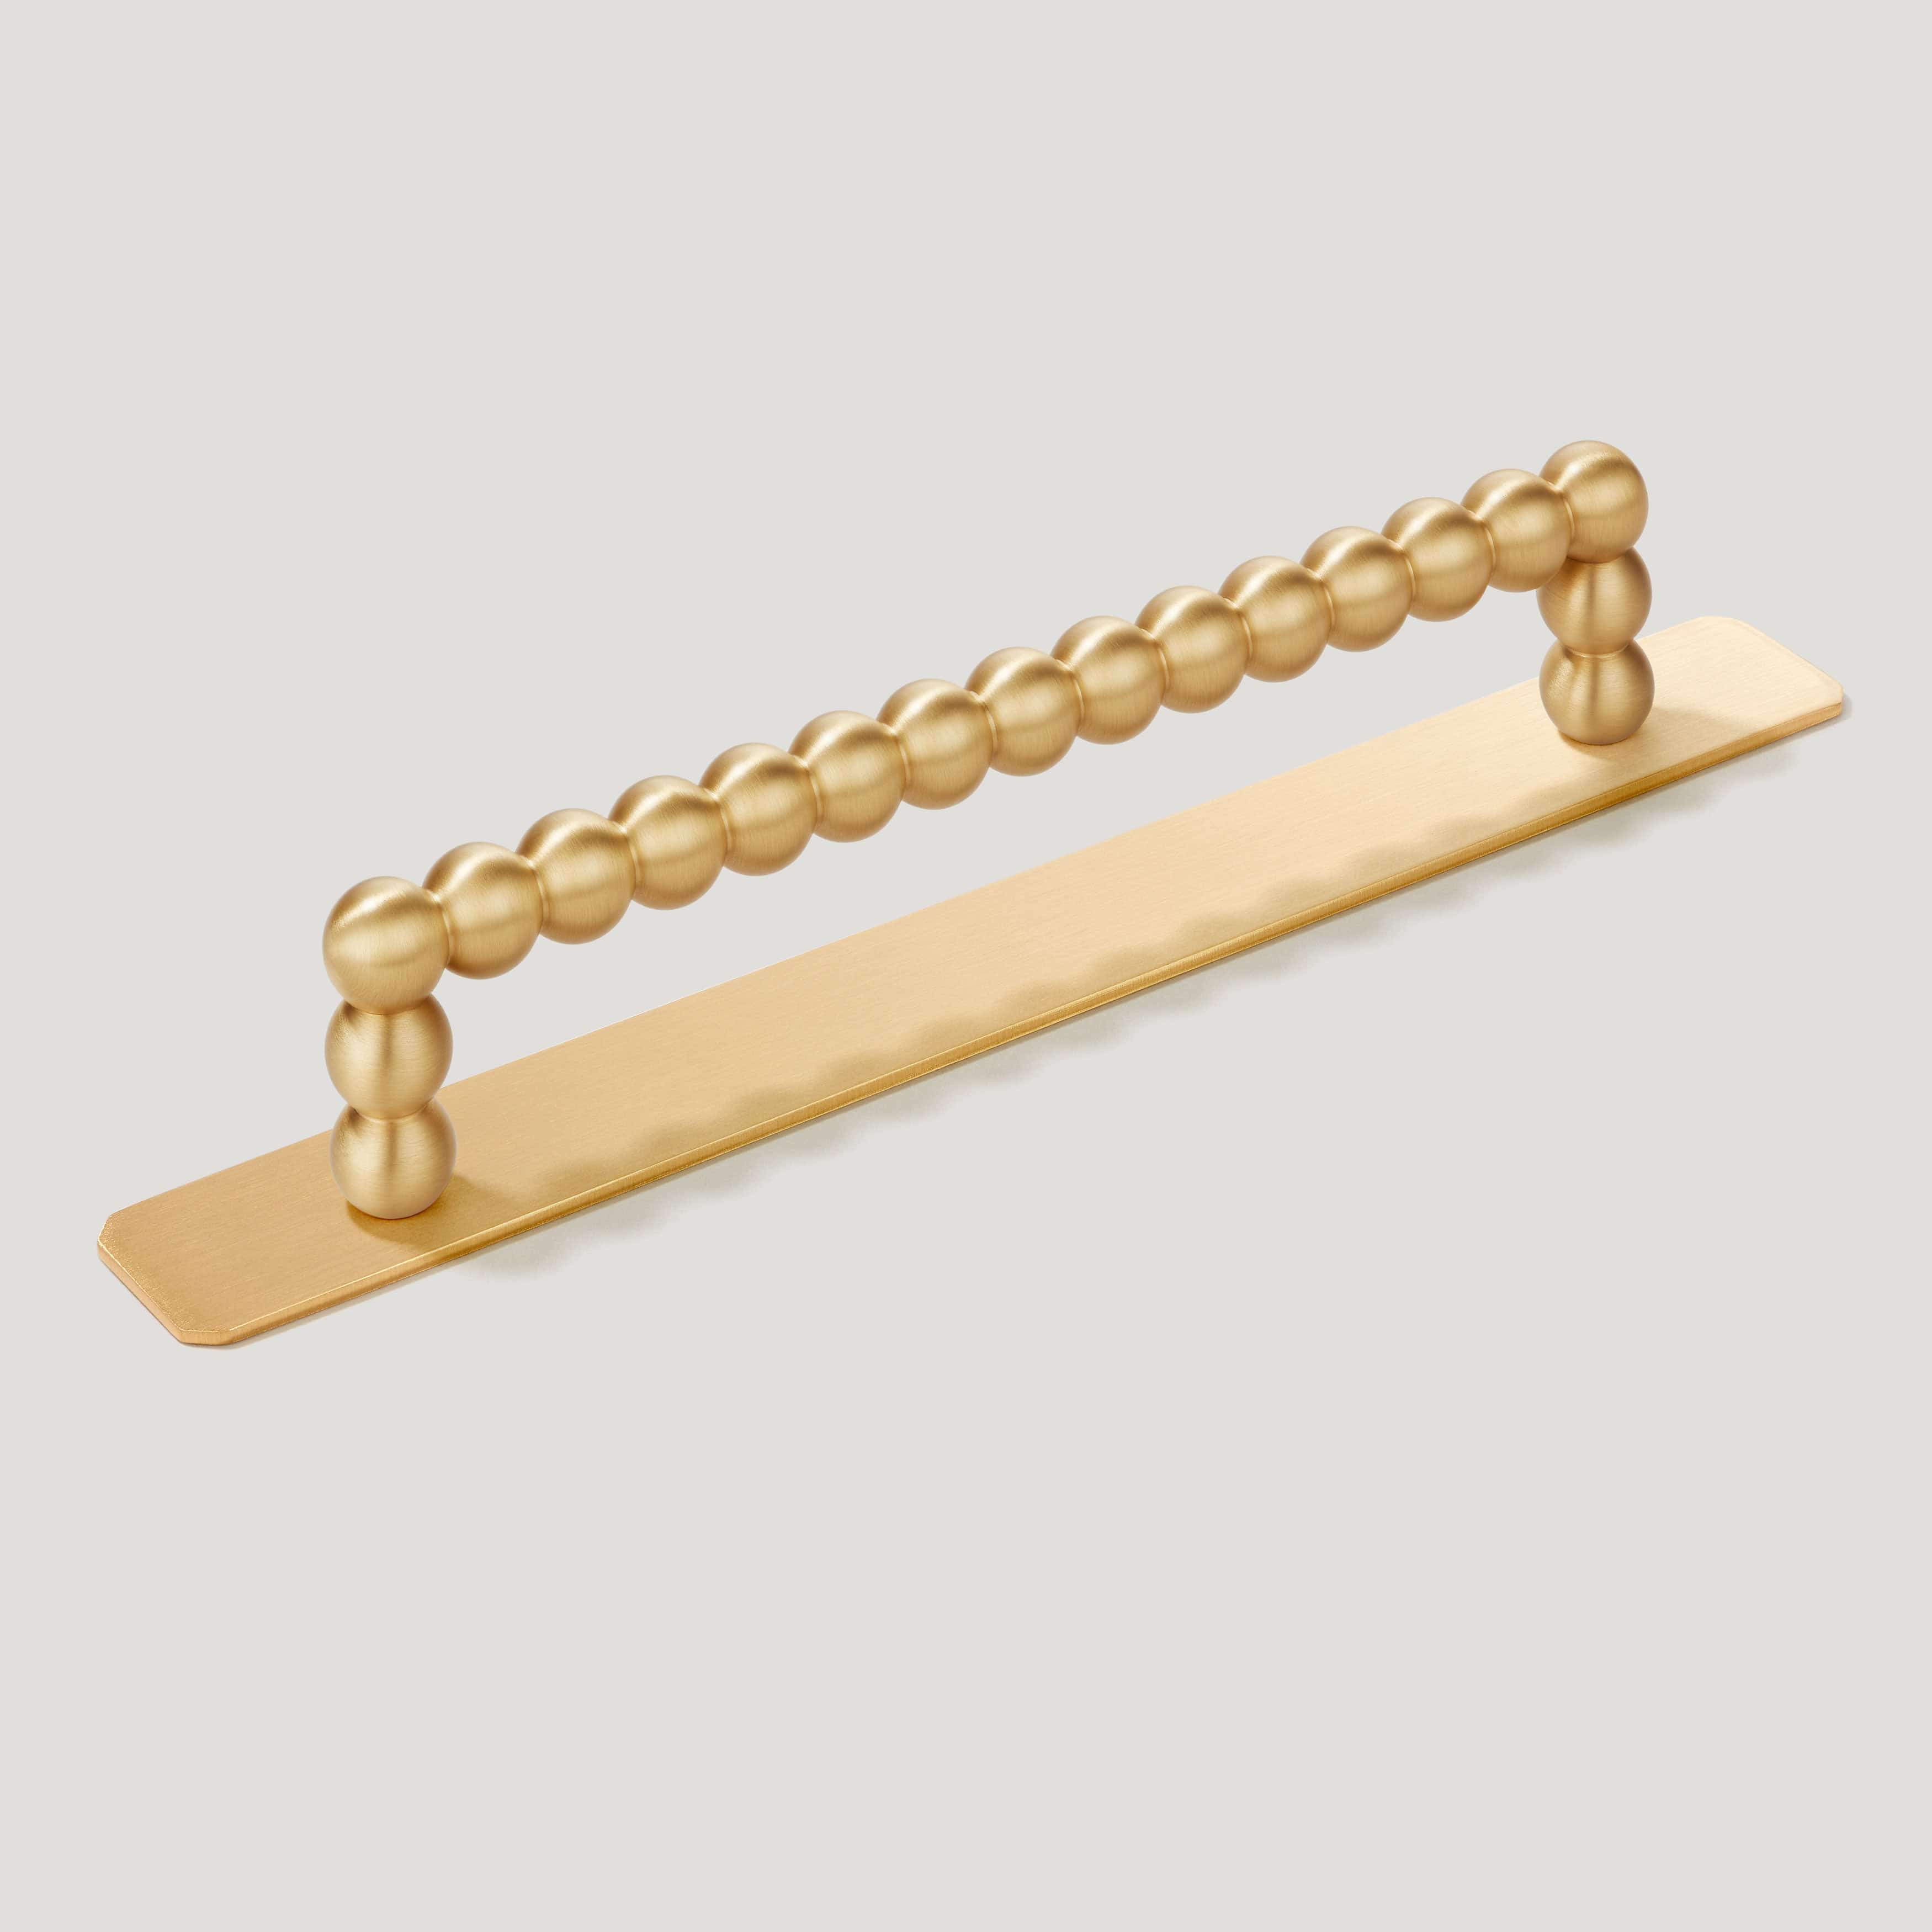 Plank Hardware Handles & Knobs Handle with Backplate BOBBIN D-Bar Handle - Brass